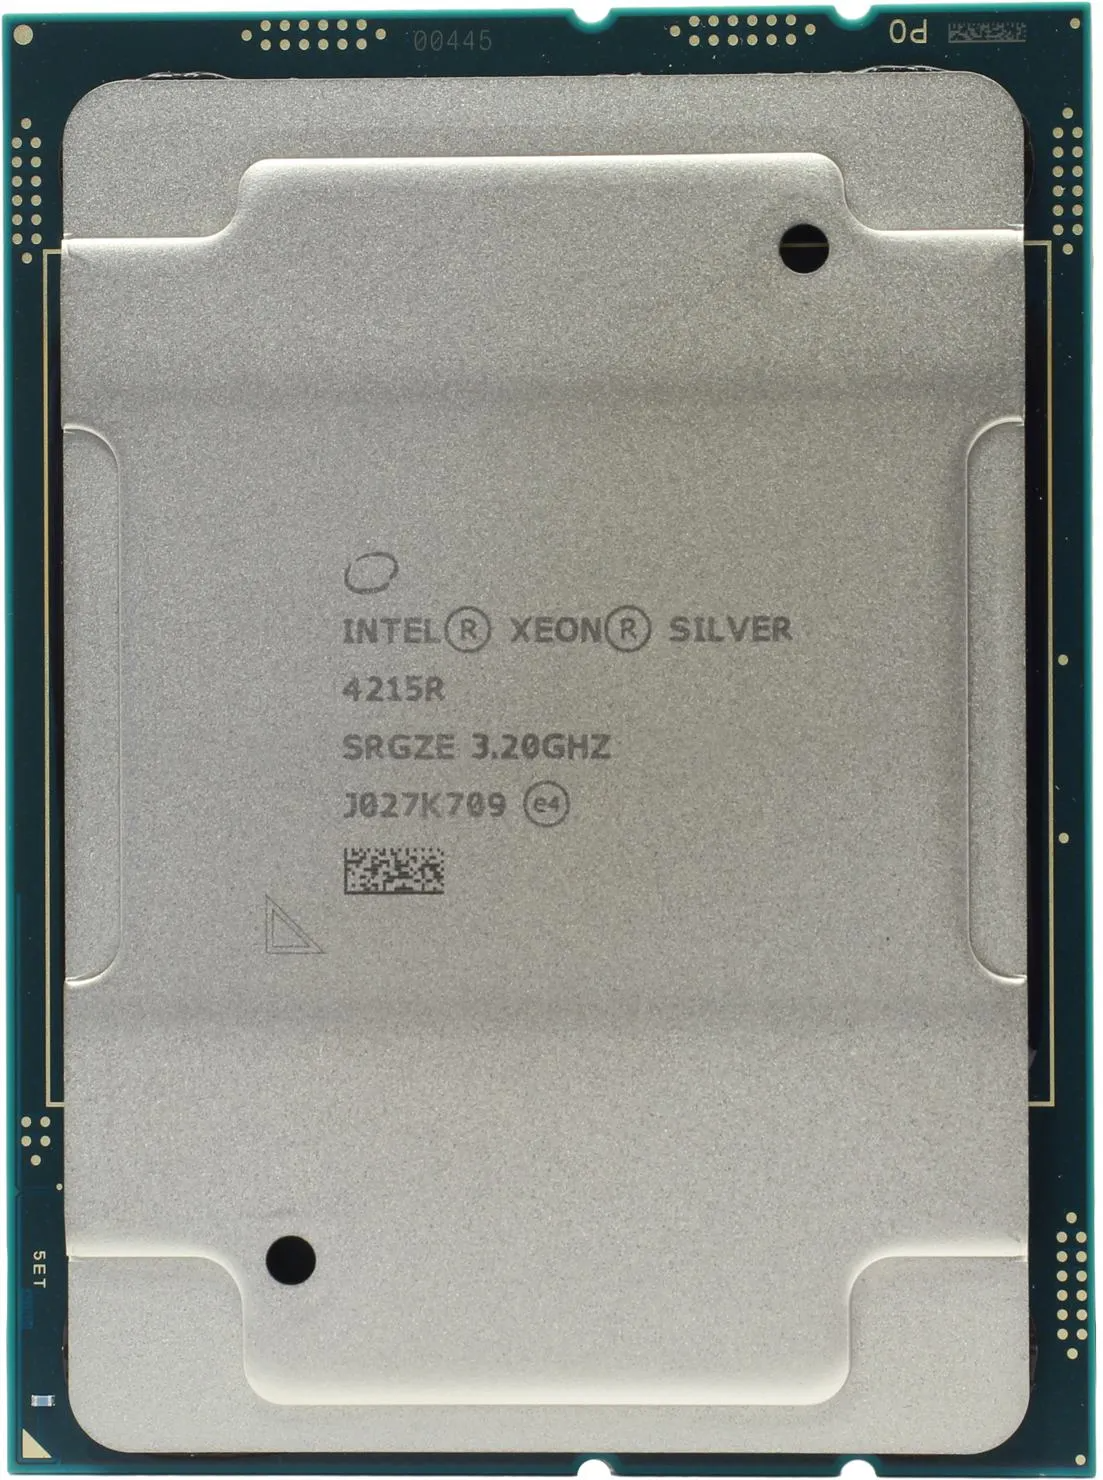 Intel Xeon Silver 4215R - 8-Cores 16-Threads, 3.20Ghz Base 4.00Ghz Turbo, 11MB Cache, 130W P/N: SRGZE